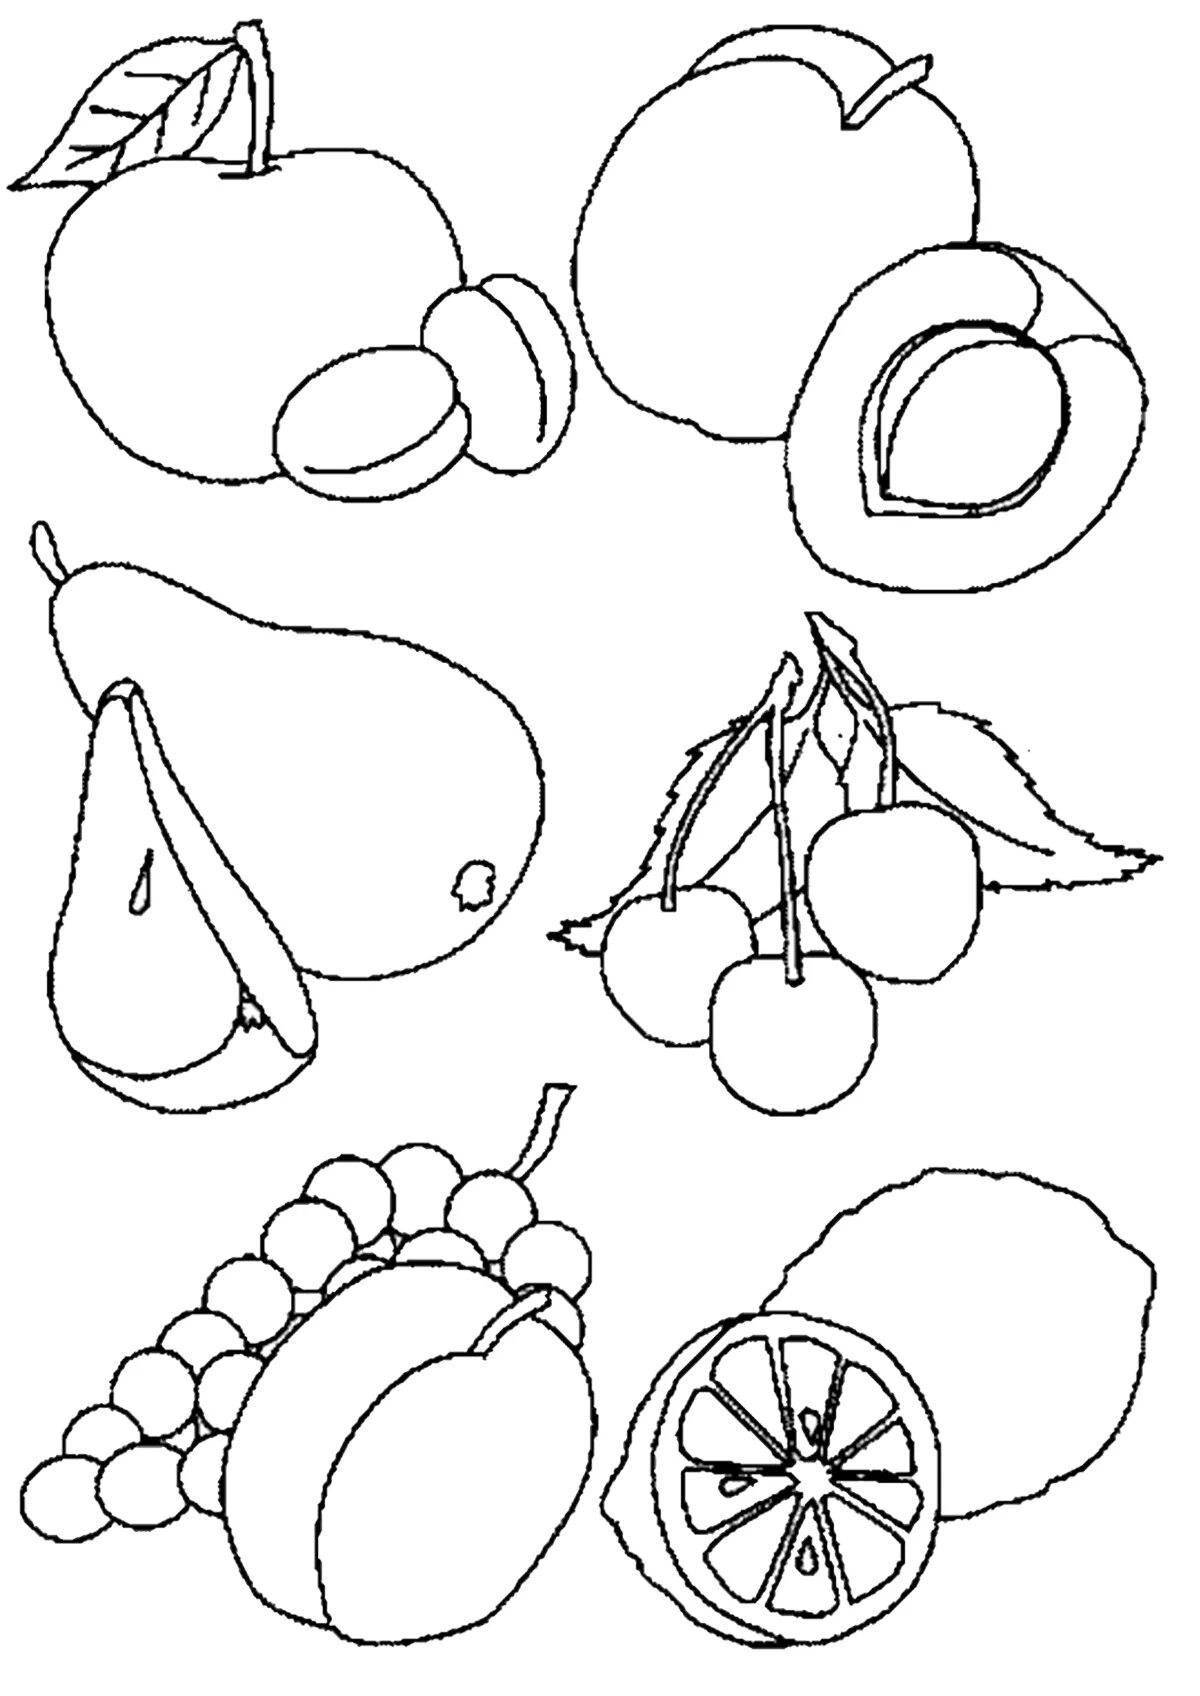 Exciting fruit coloring pages for girls